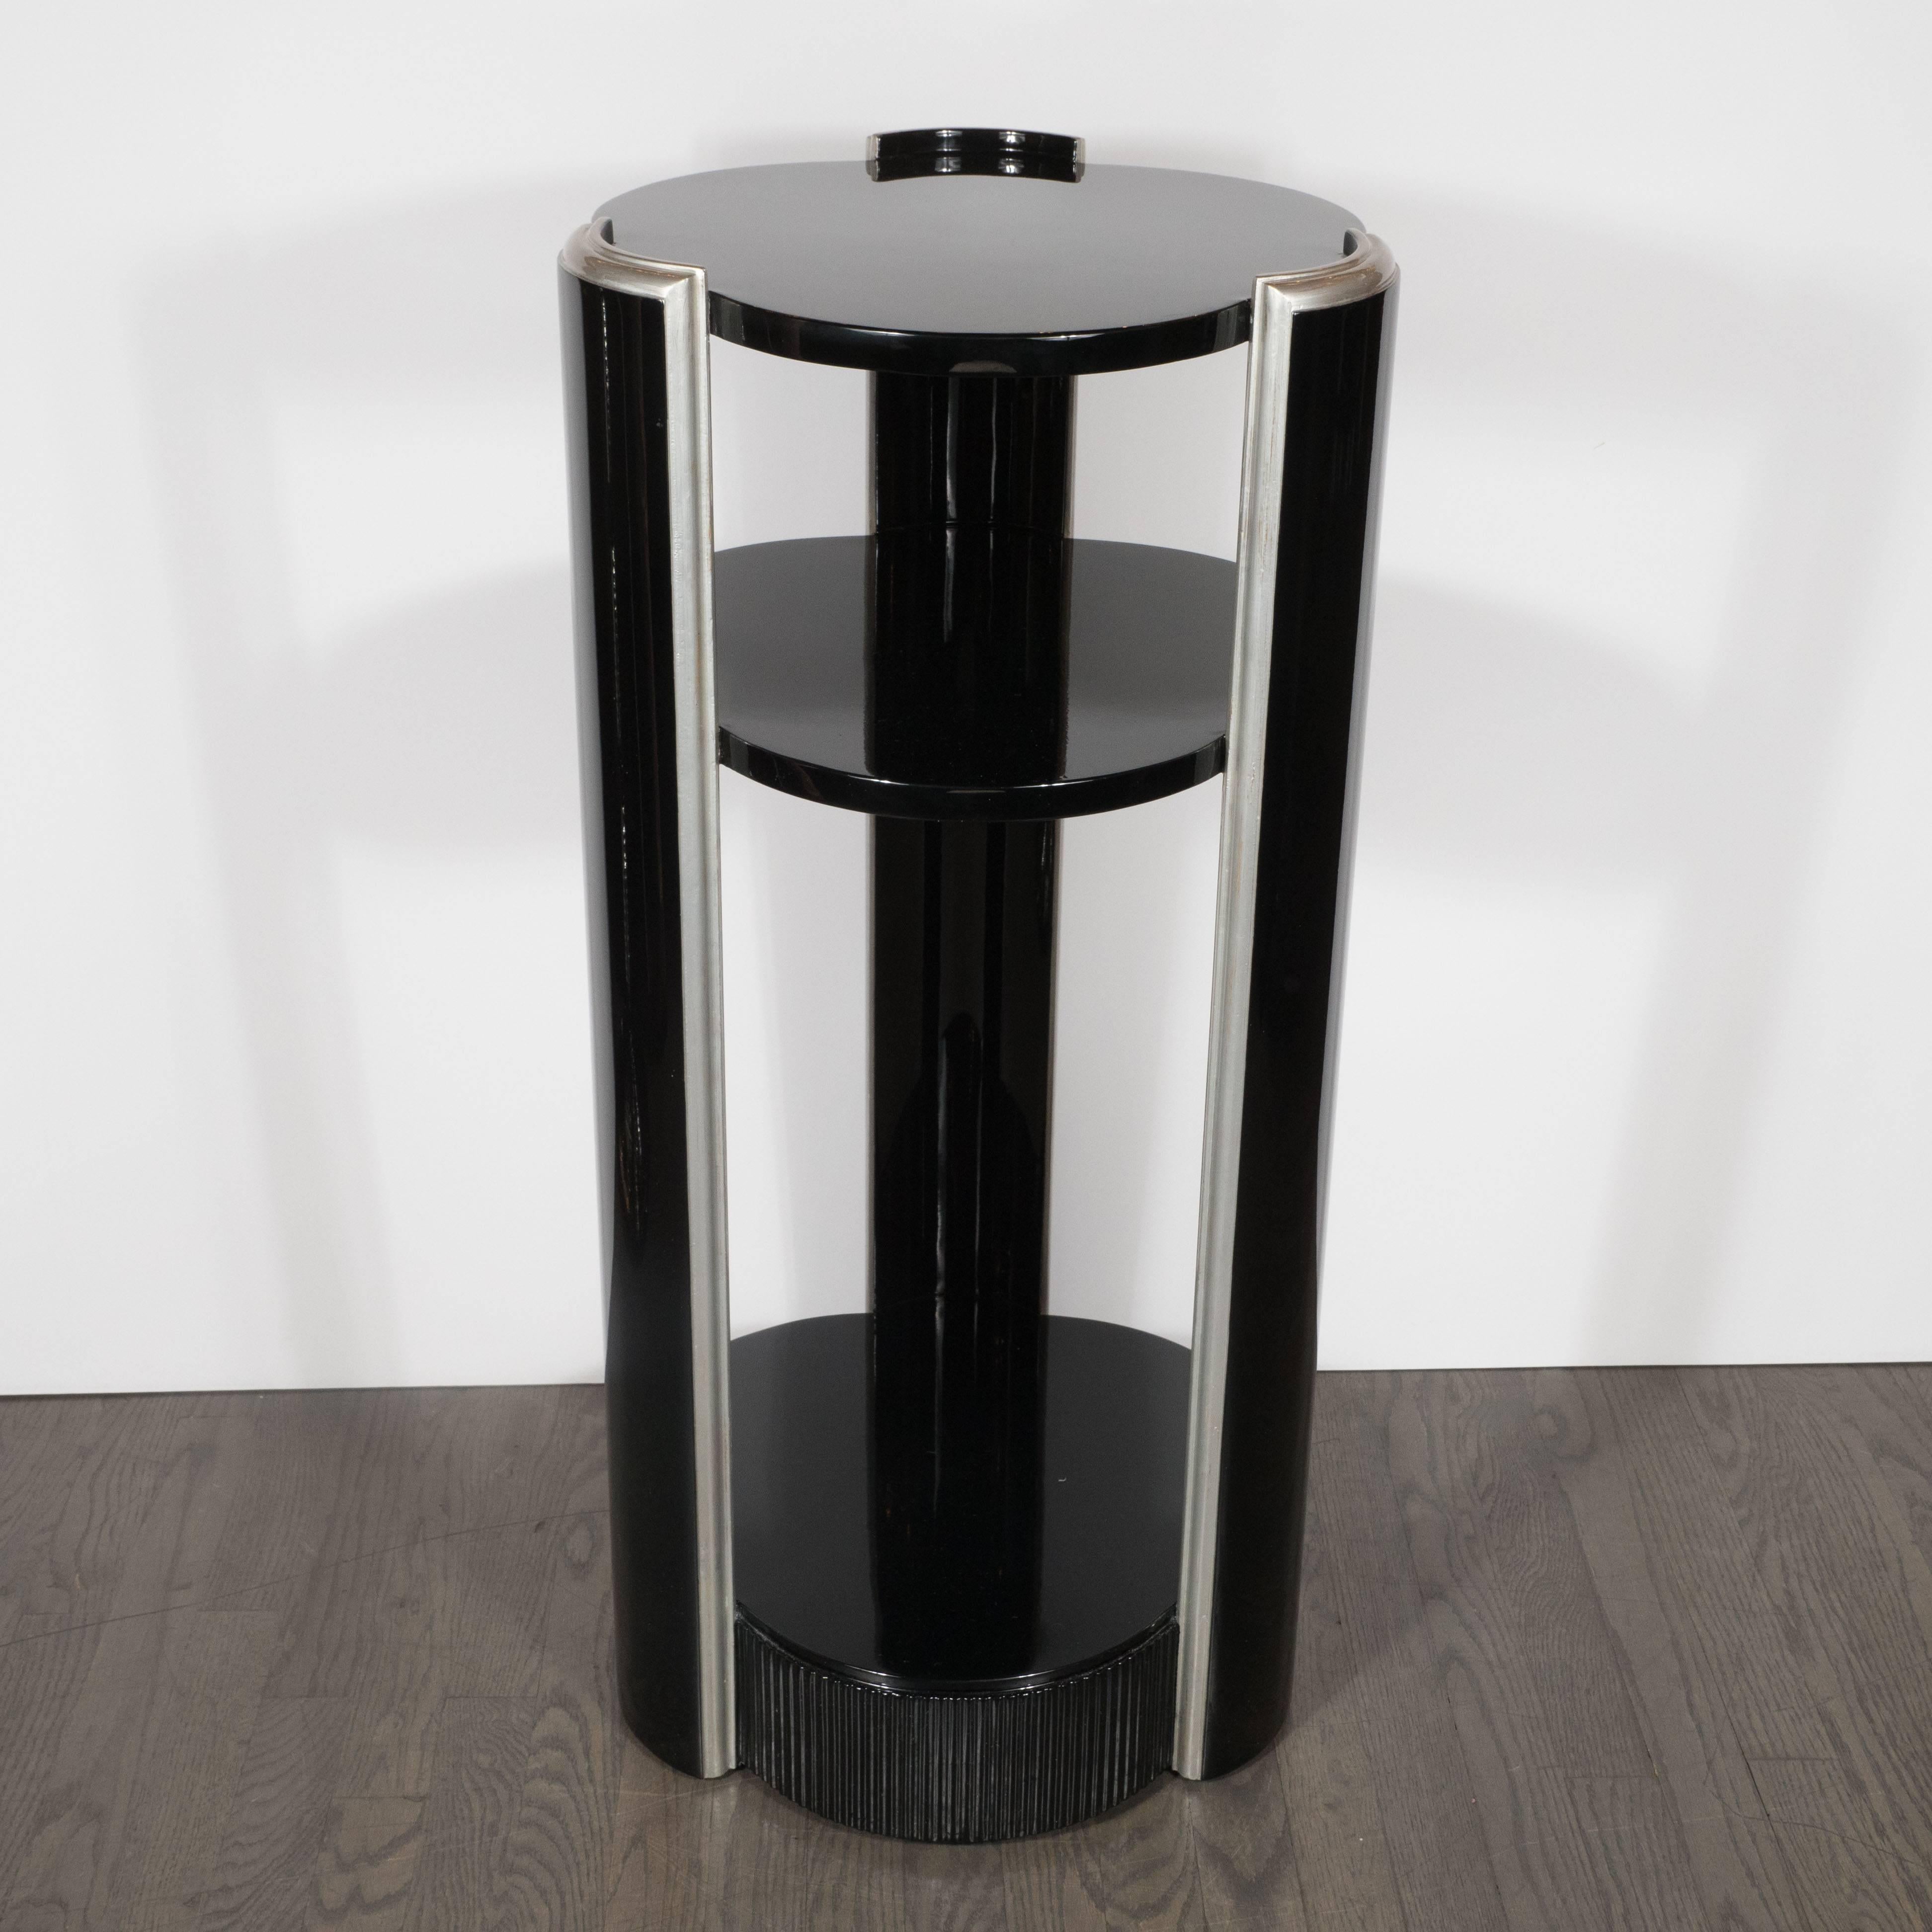 This refined black lacquer pedestal features three clover shaped tops, resembling Van Cleef & Arpels 